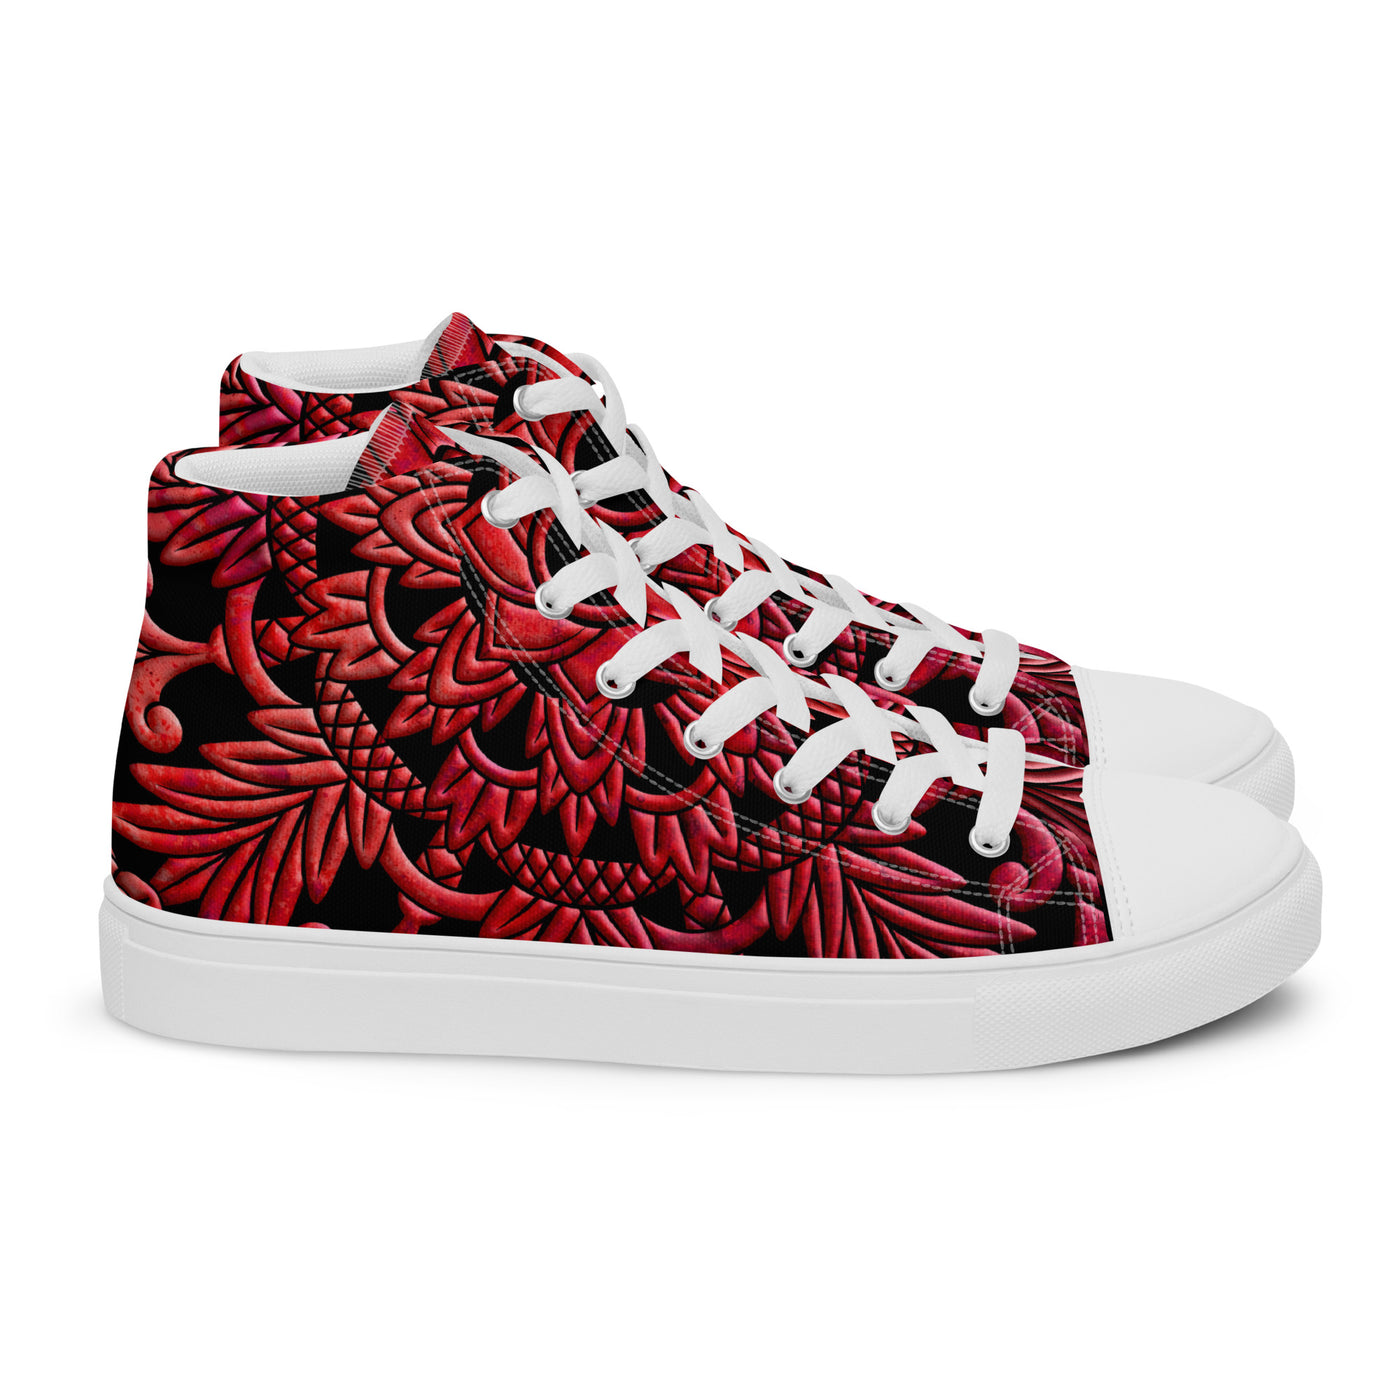 Mandala Red - Women's High Top Canvas Shoes